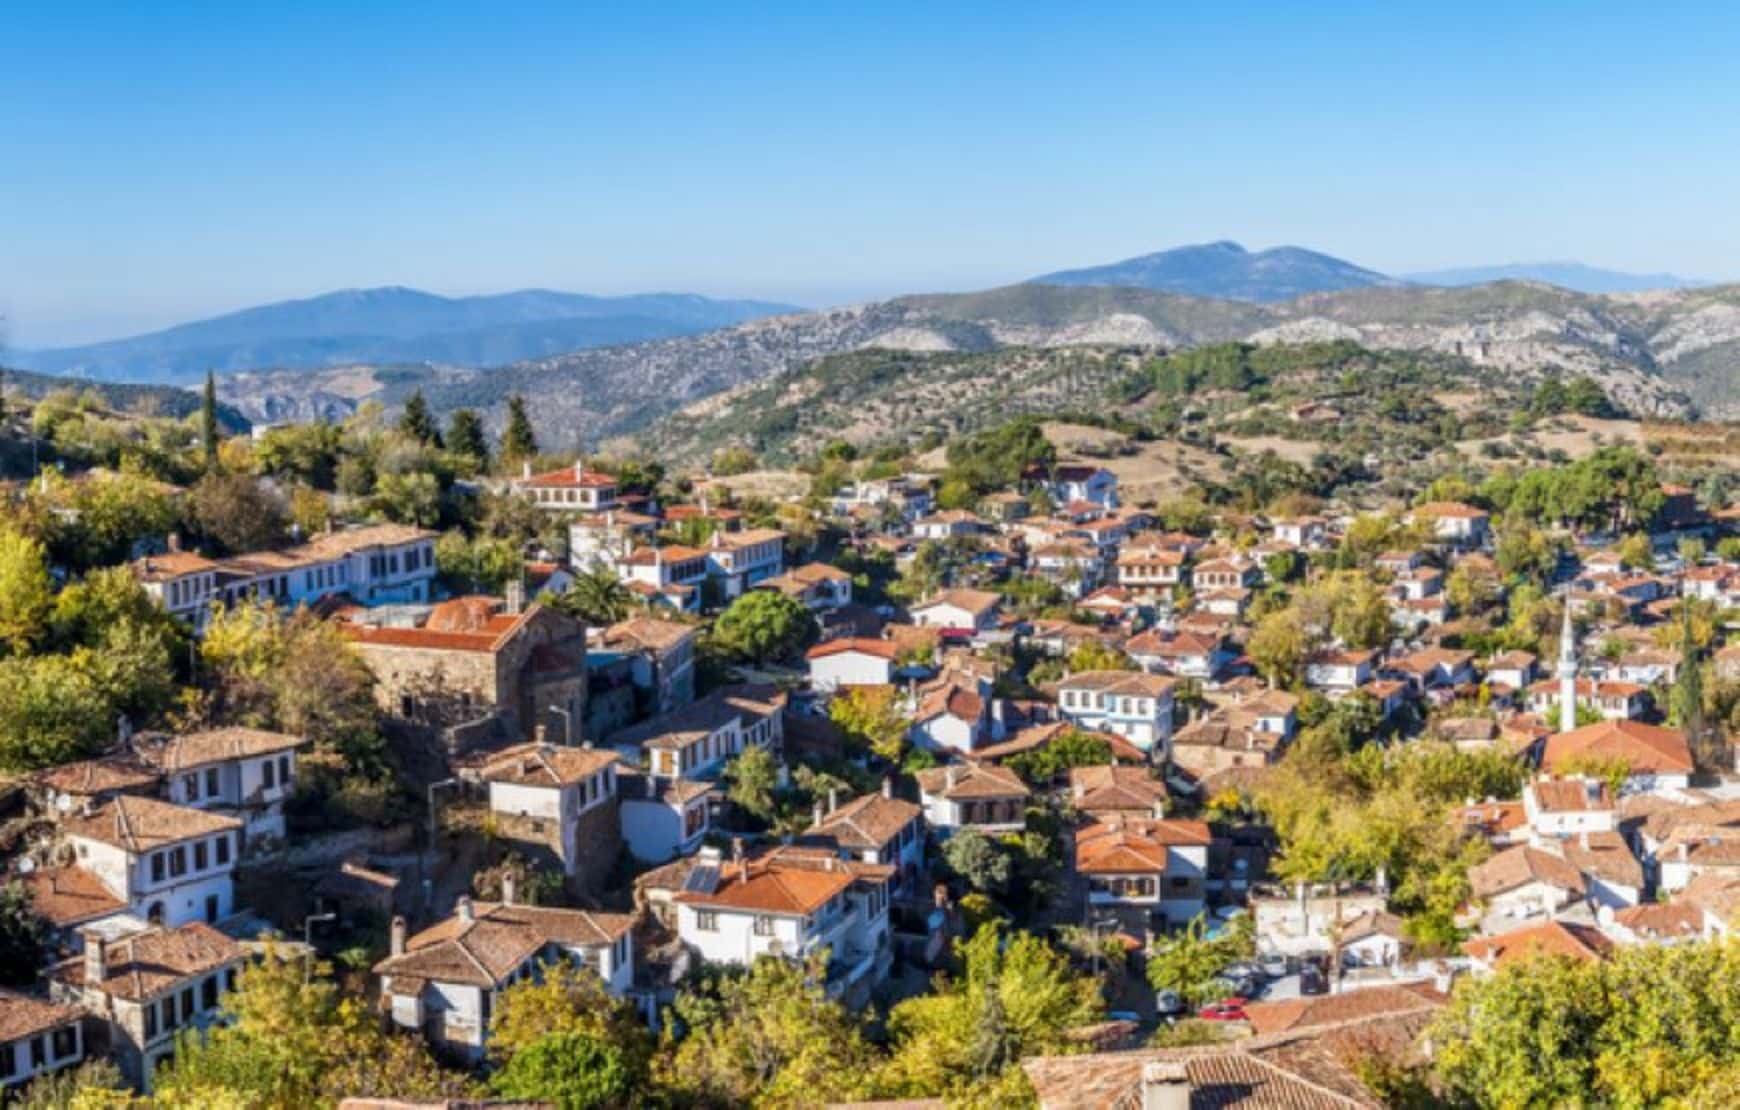 Selcuk Ephesus Private Tour - Sirince Village from above - morning view